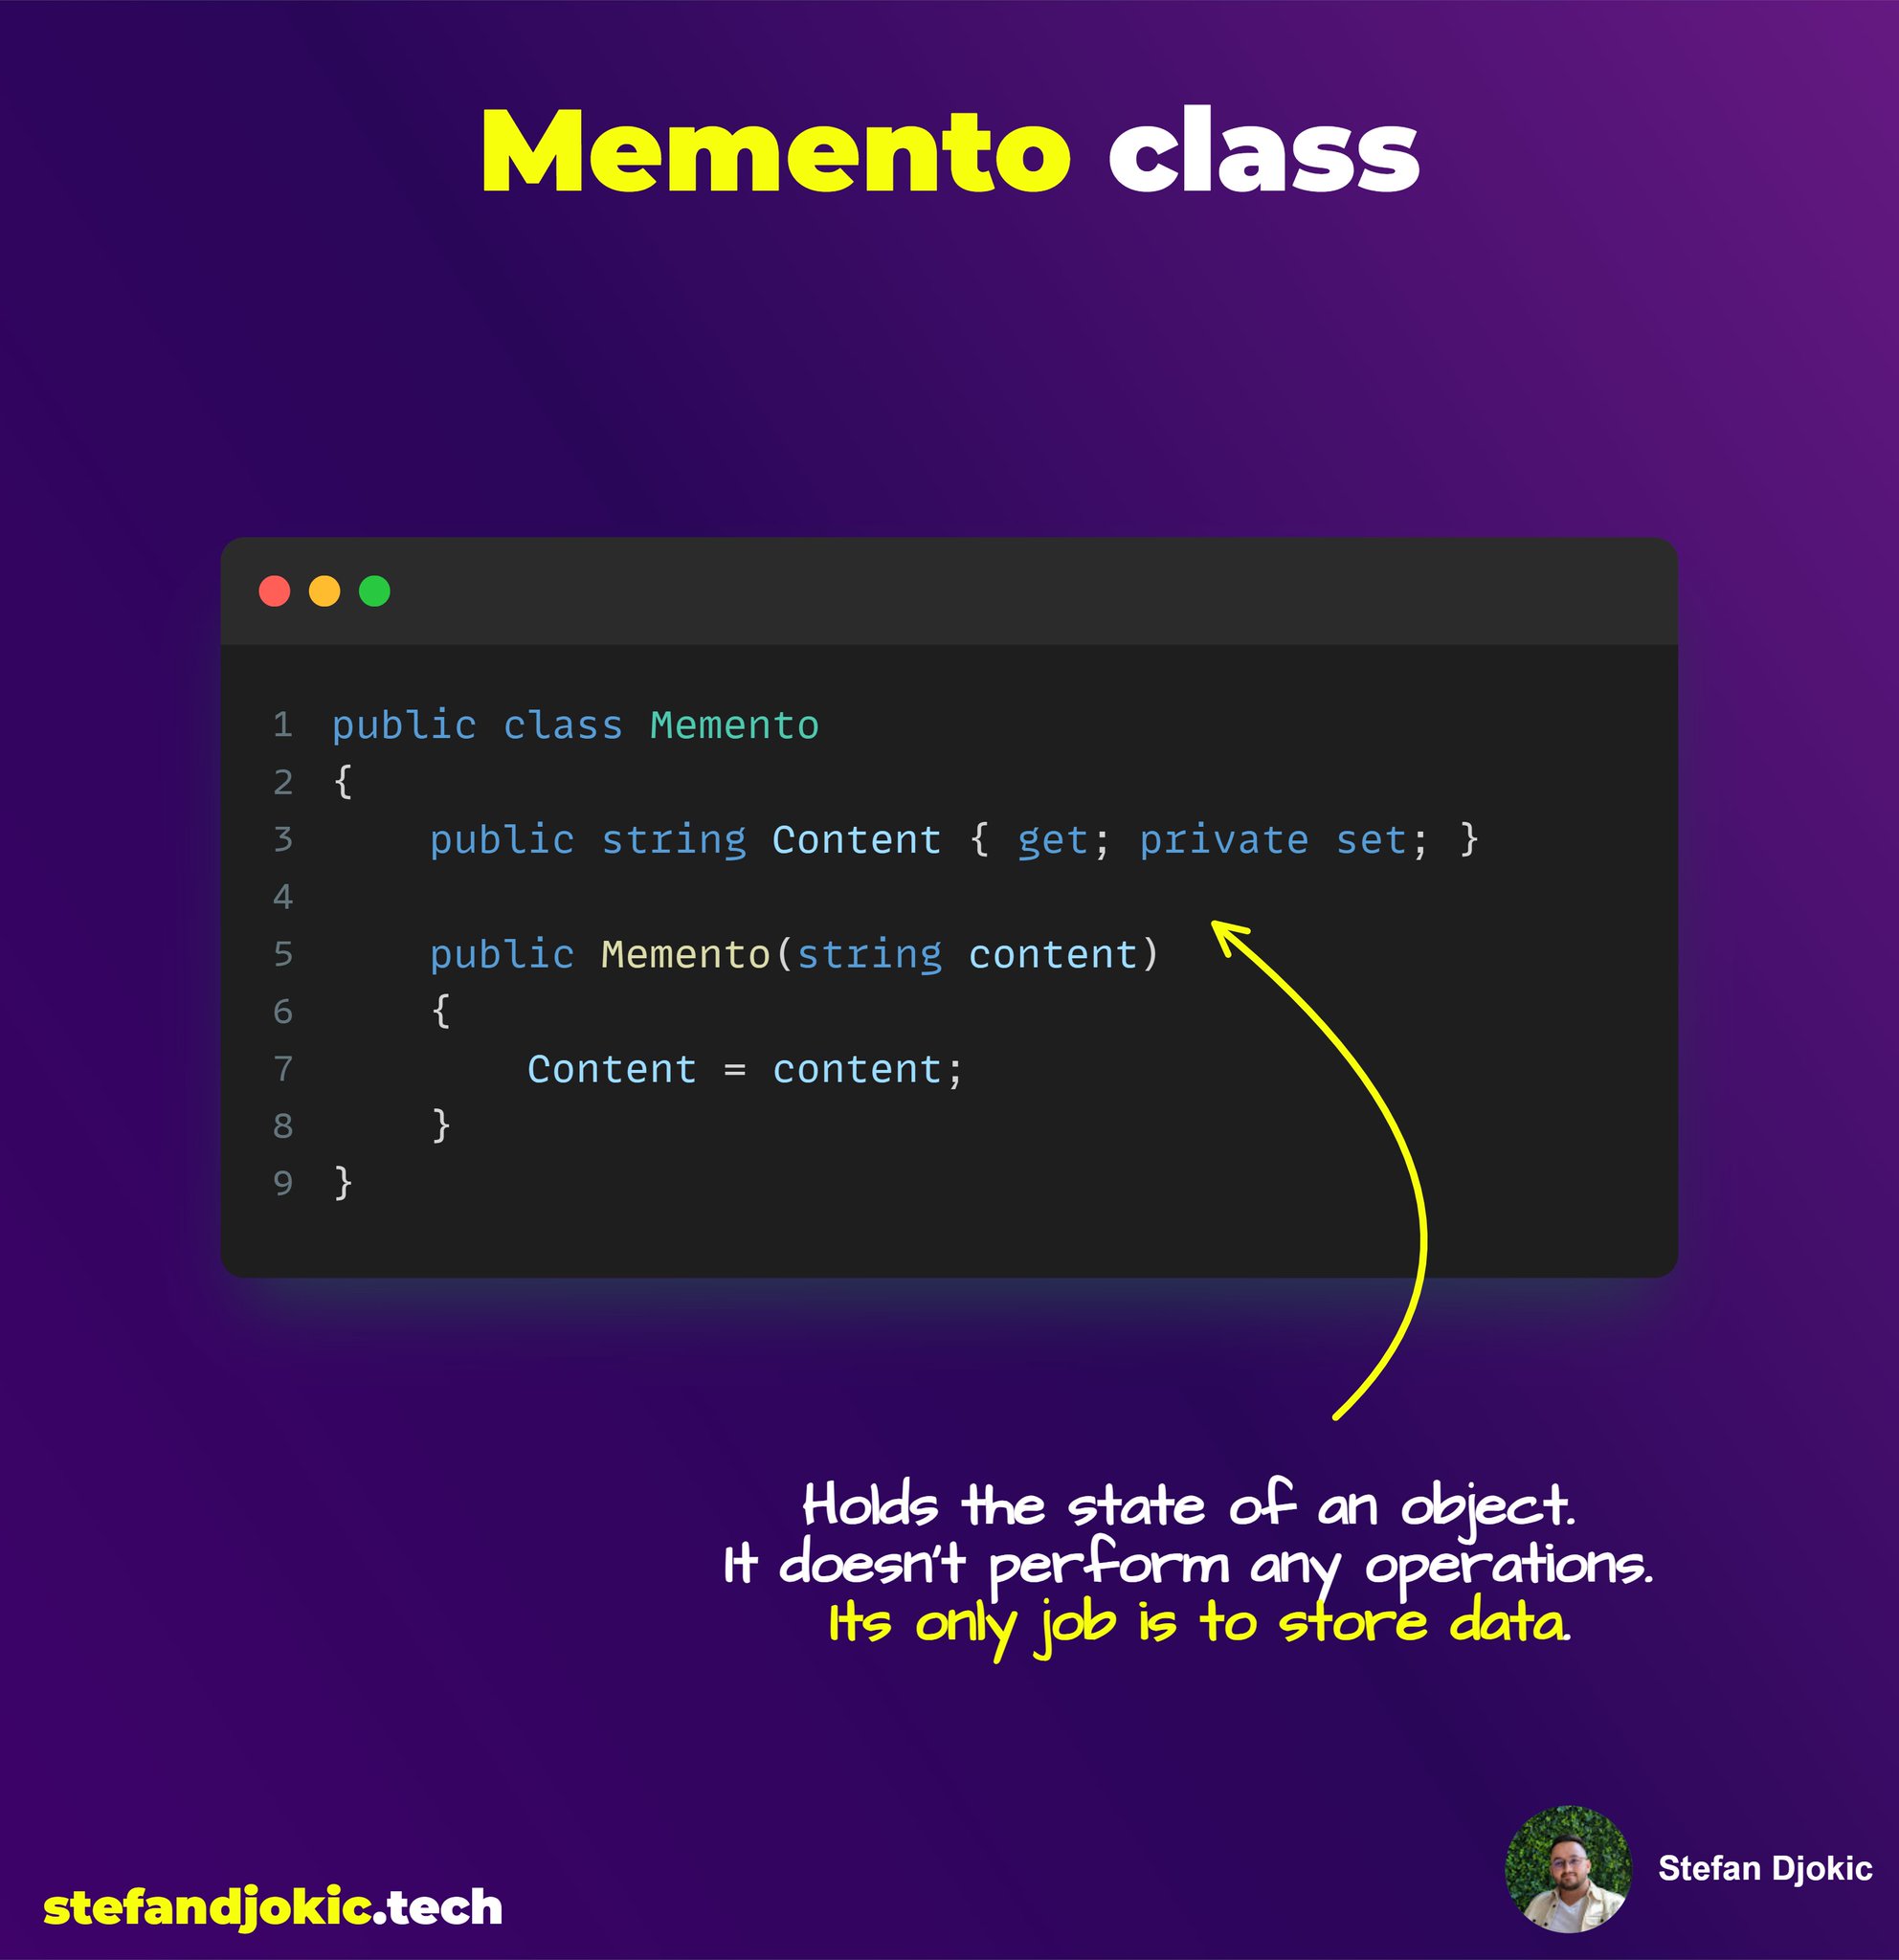 How to use the Memento design pattern in C#